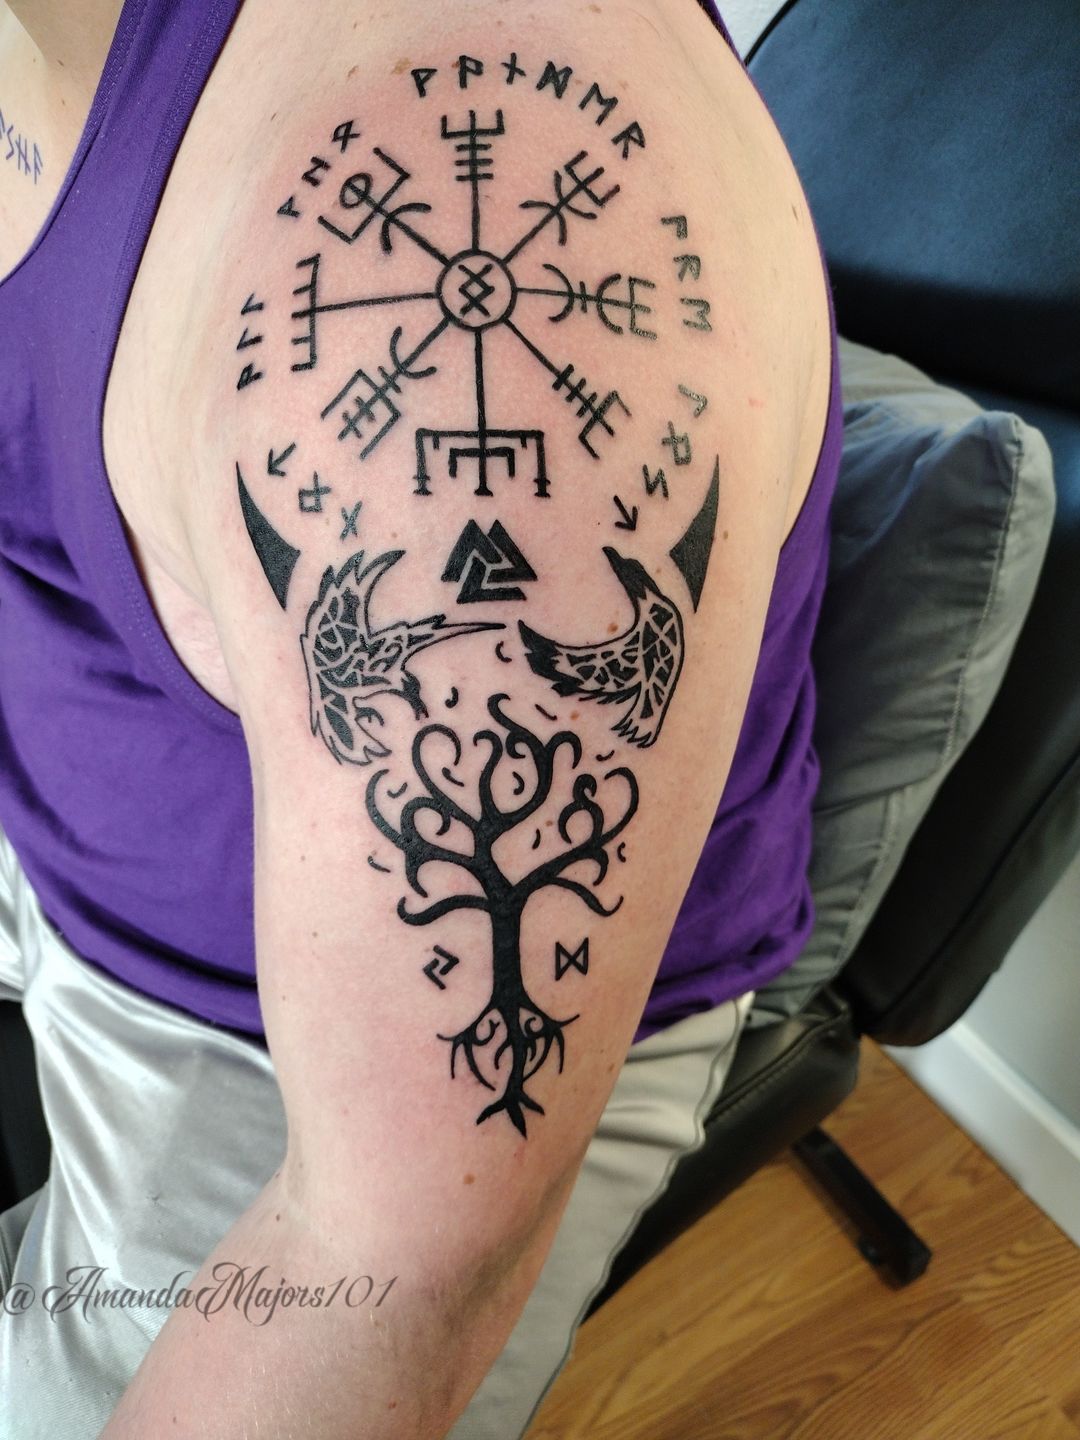 Pagan Tattoo of Edmonton - My very first polynesian piece. On a fella named  Igor who wanted this tattoo before he returned home to  Croatia...Interesting ioportunity that started my career in polynesian